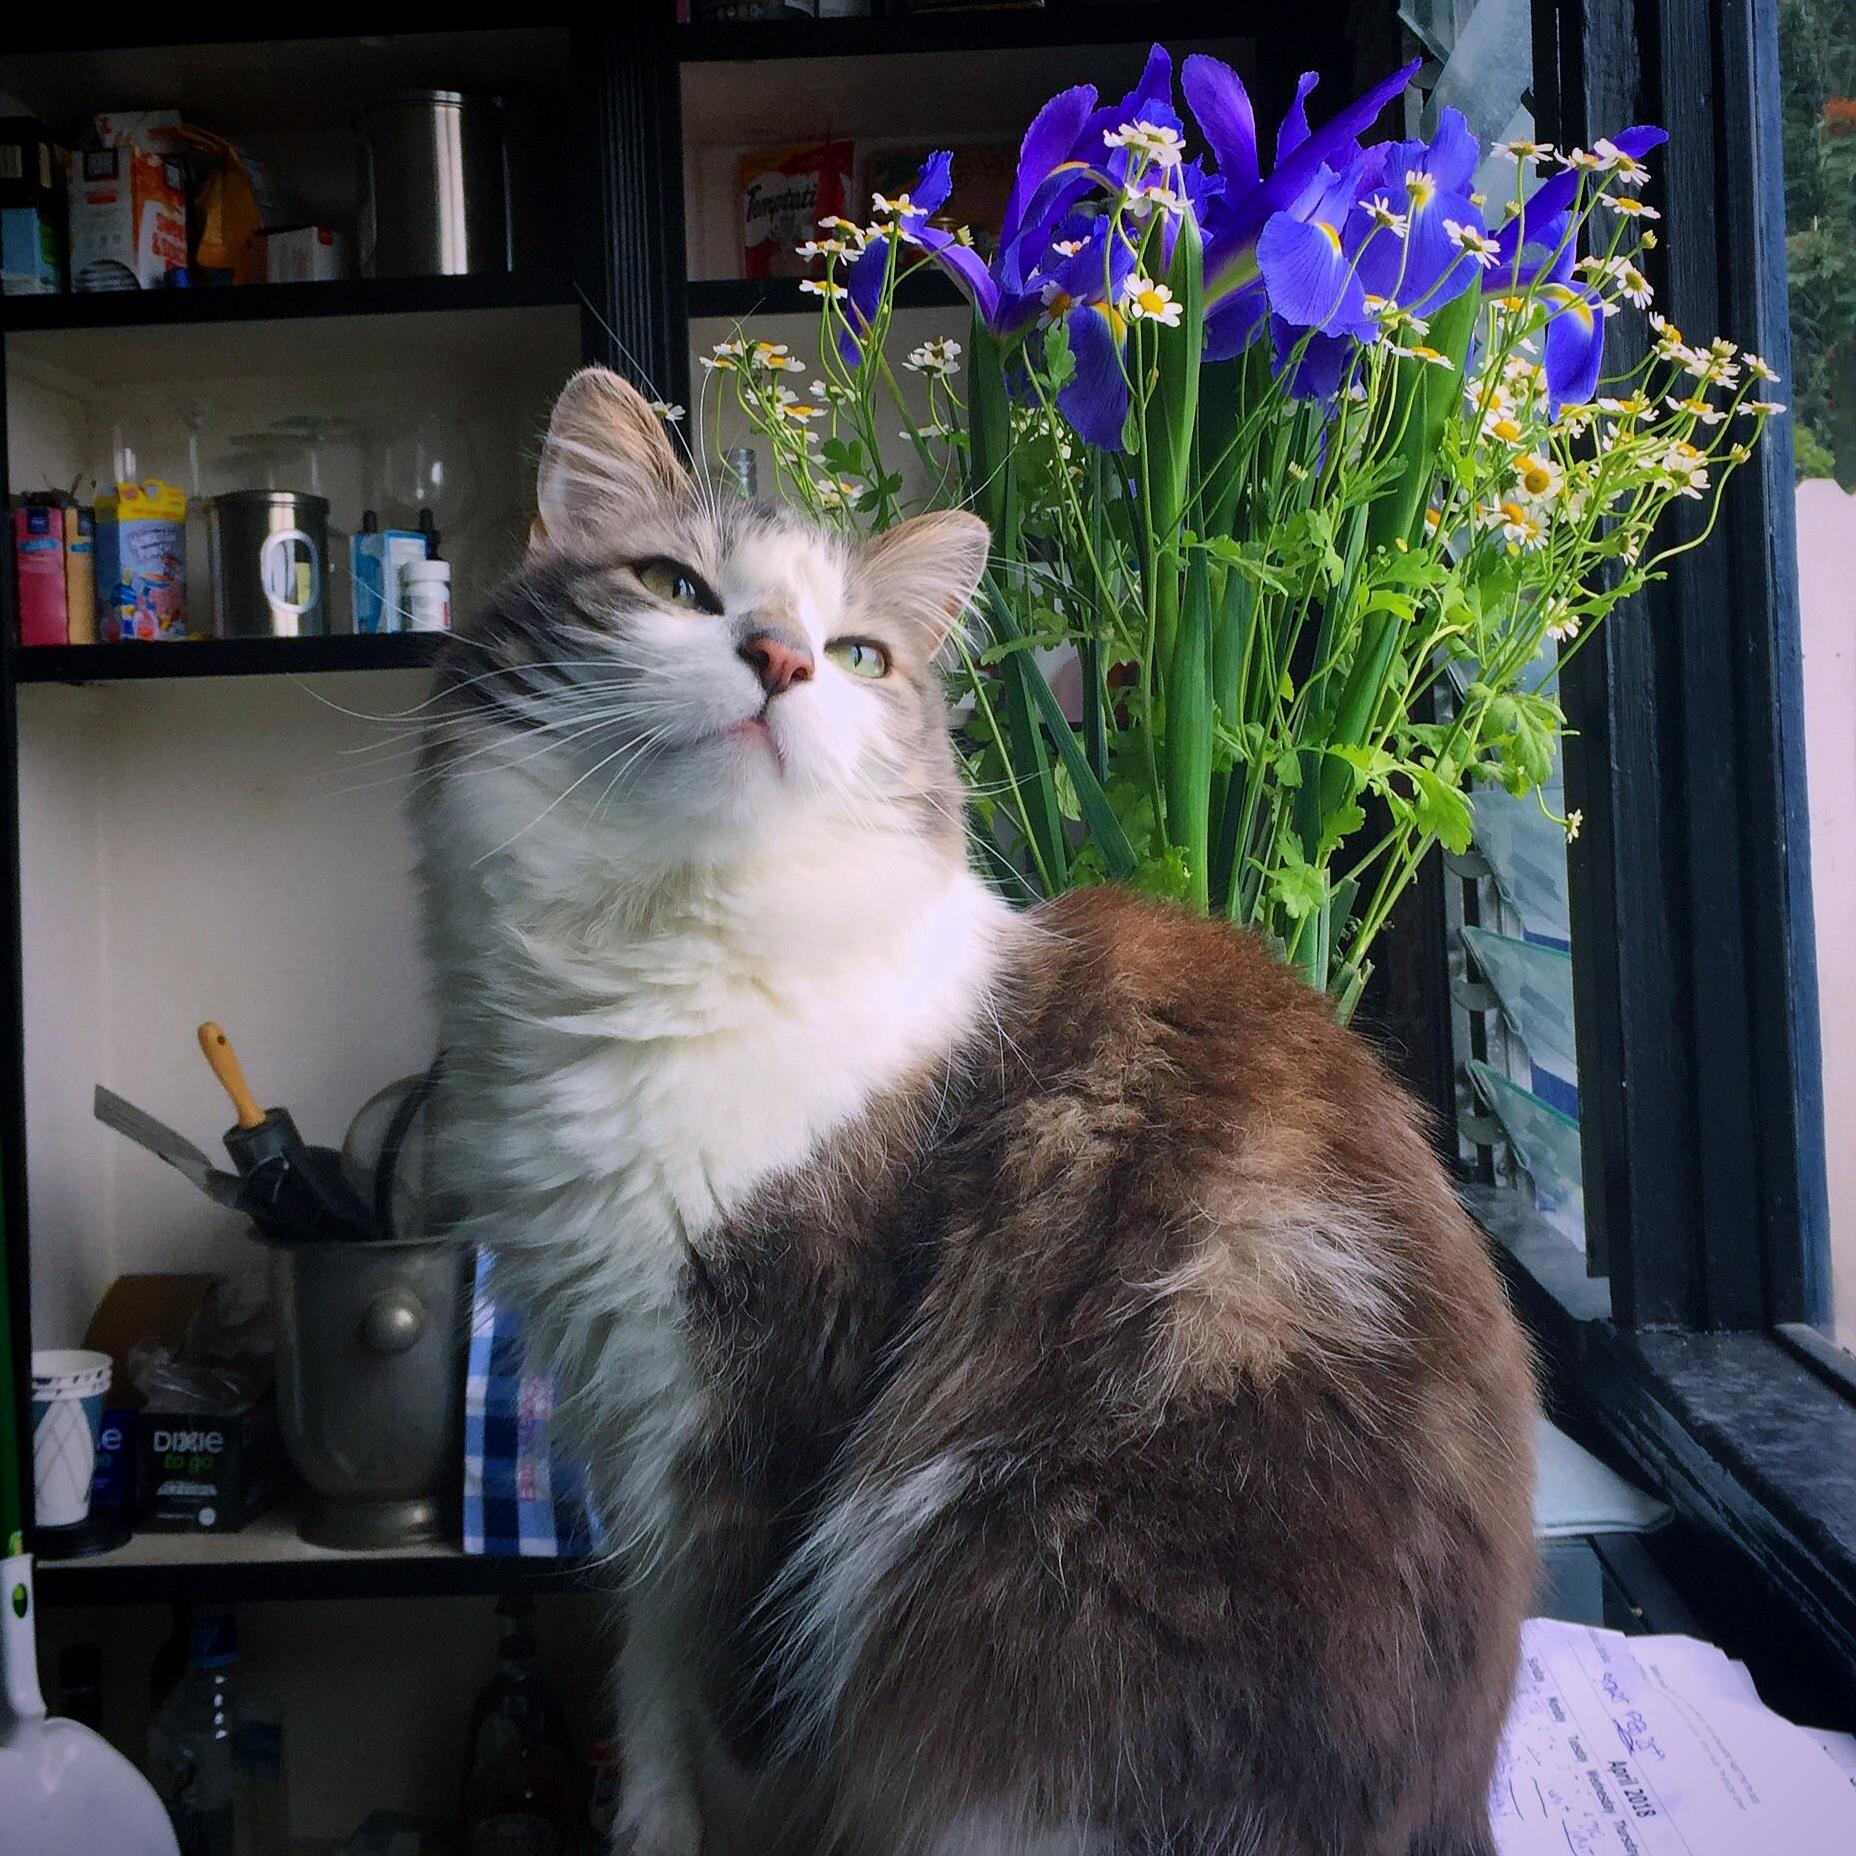 Meowboi kitten loves hugs and flowers. such a special boy